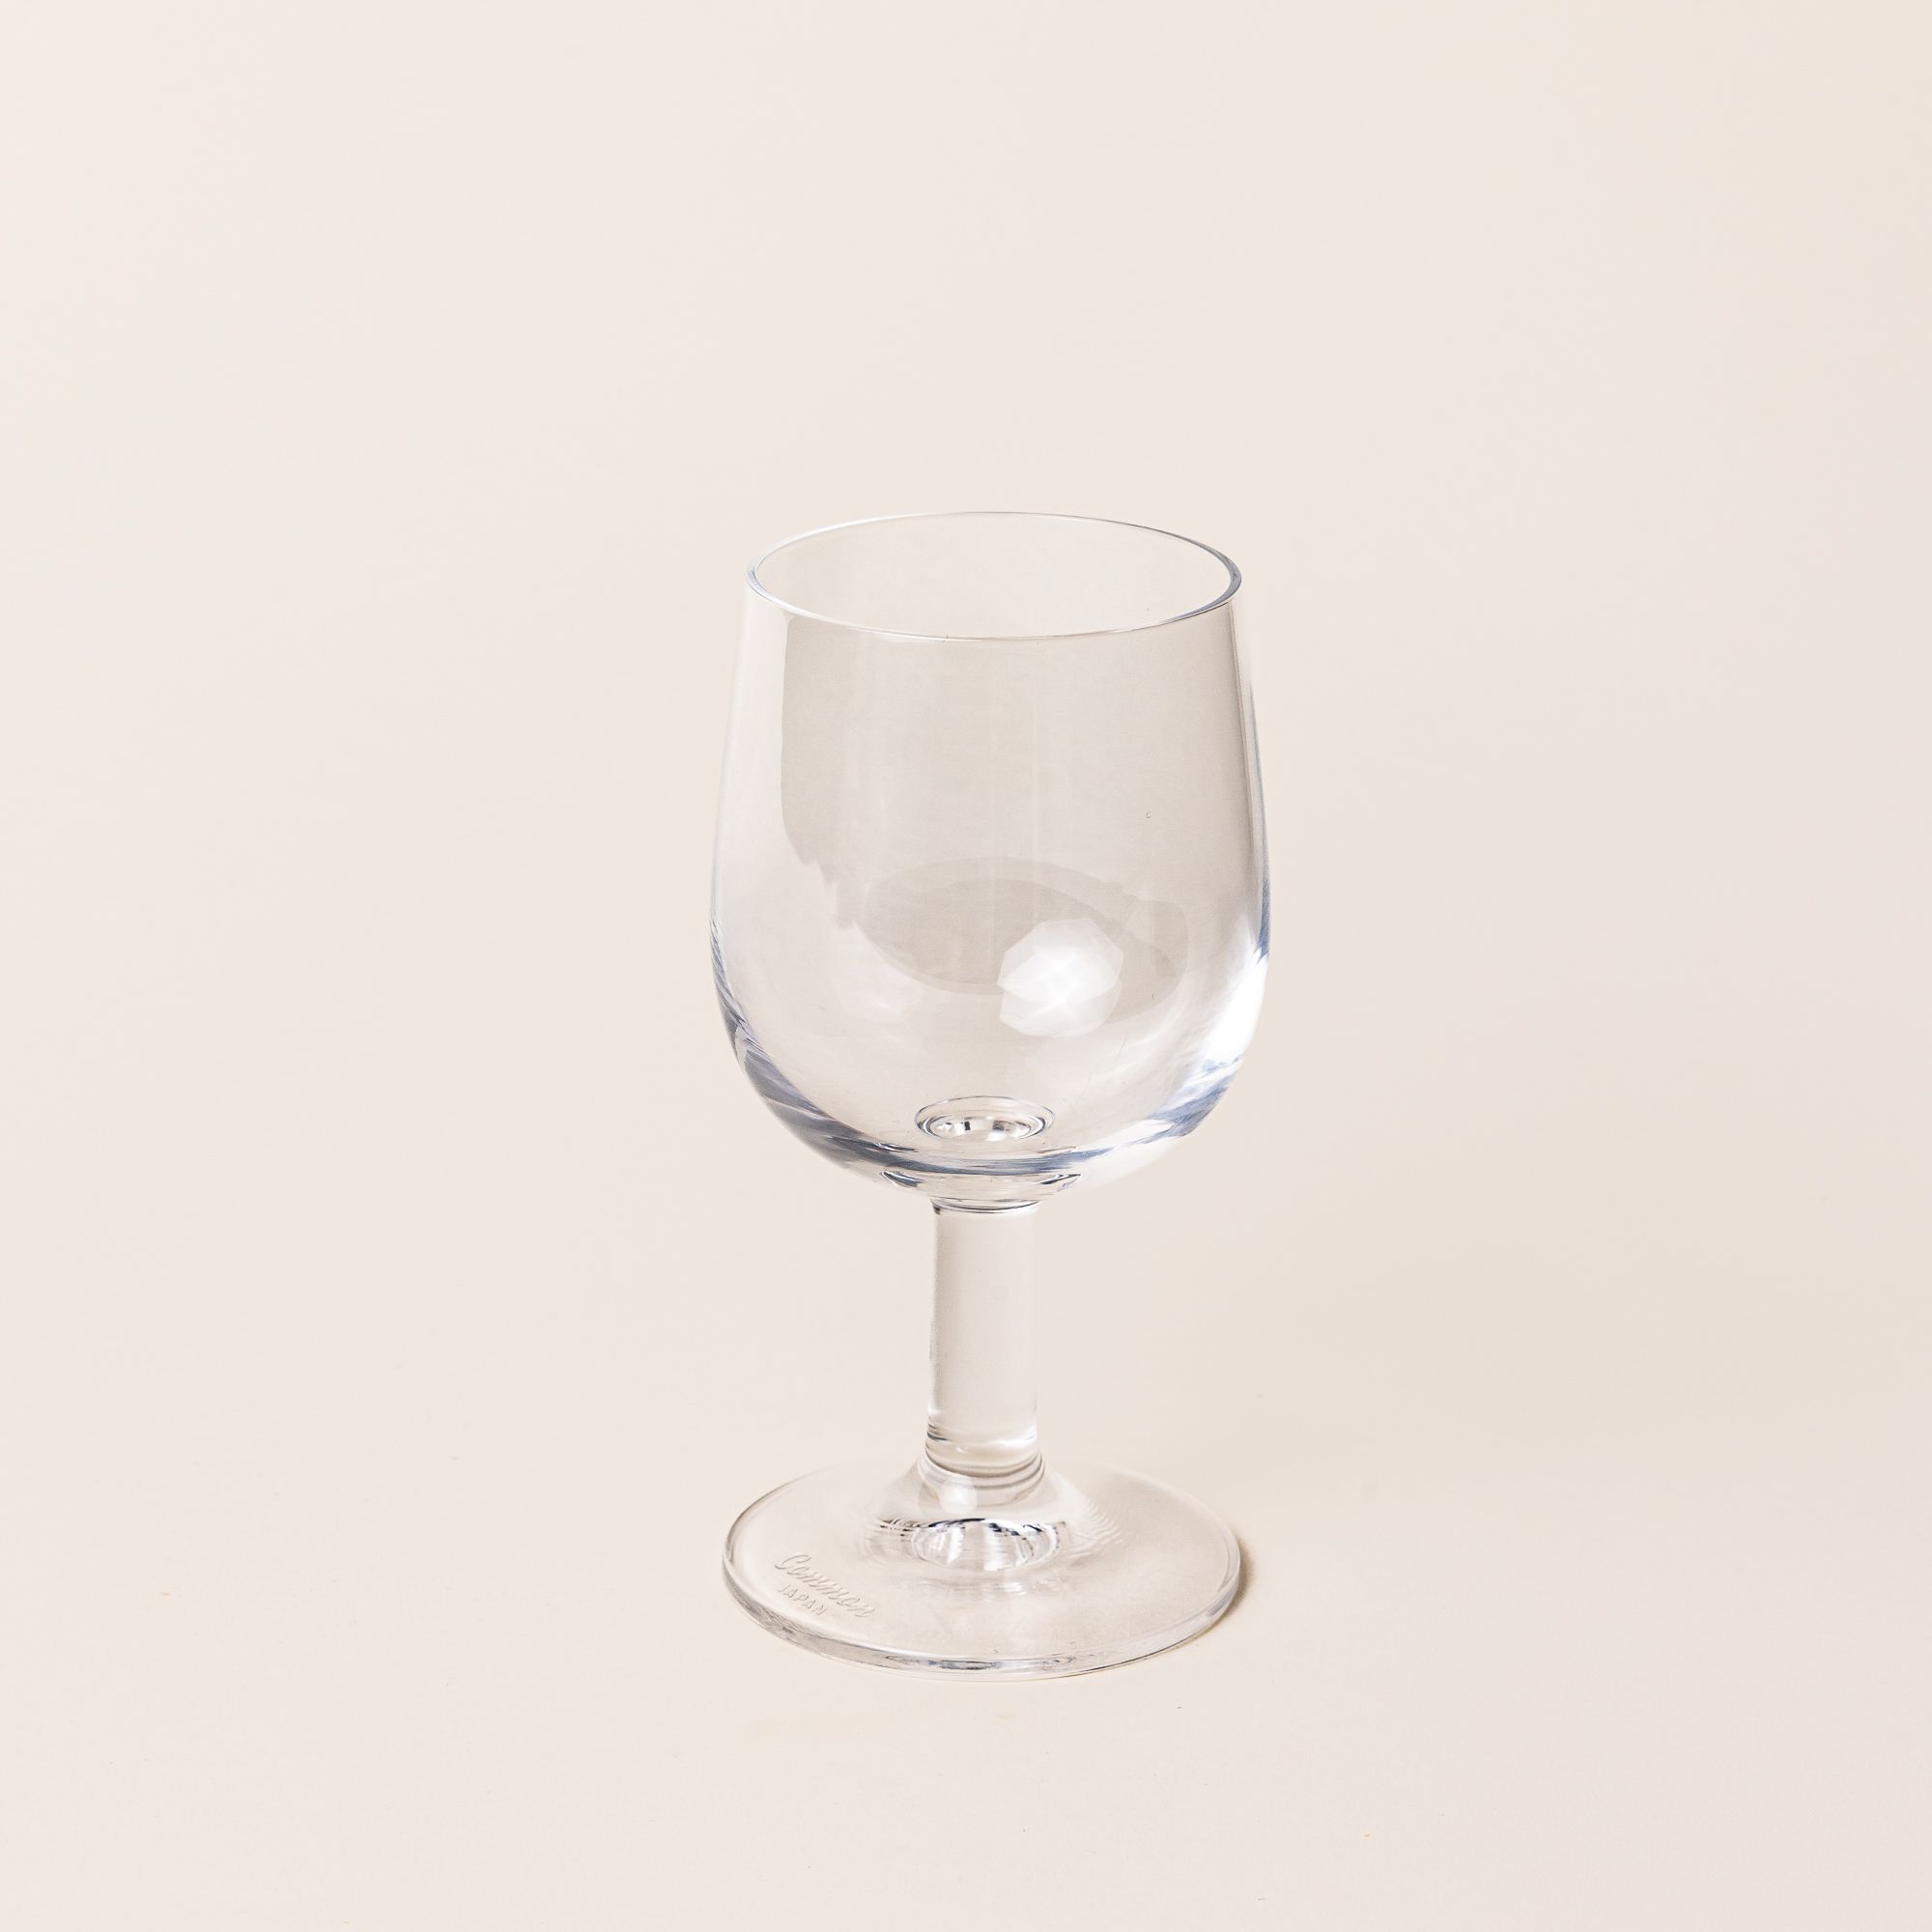 A clear wine glass with a short stem and wide cup.